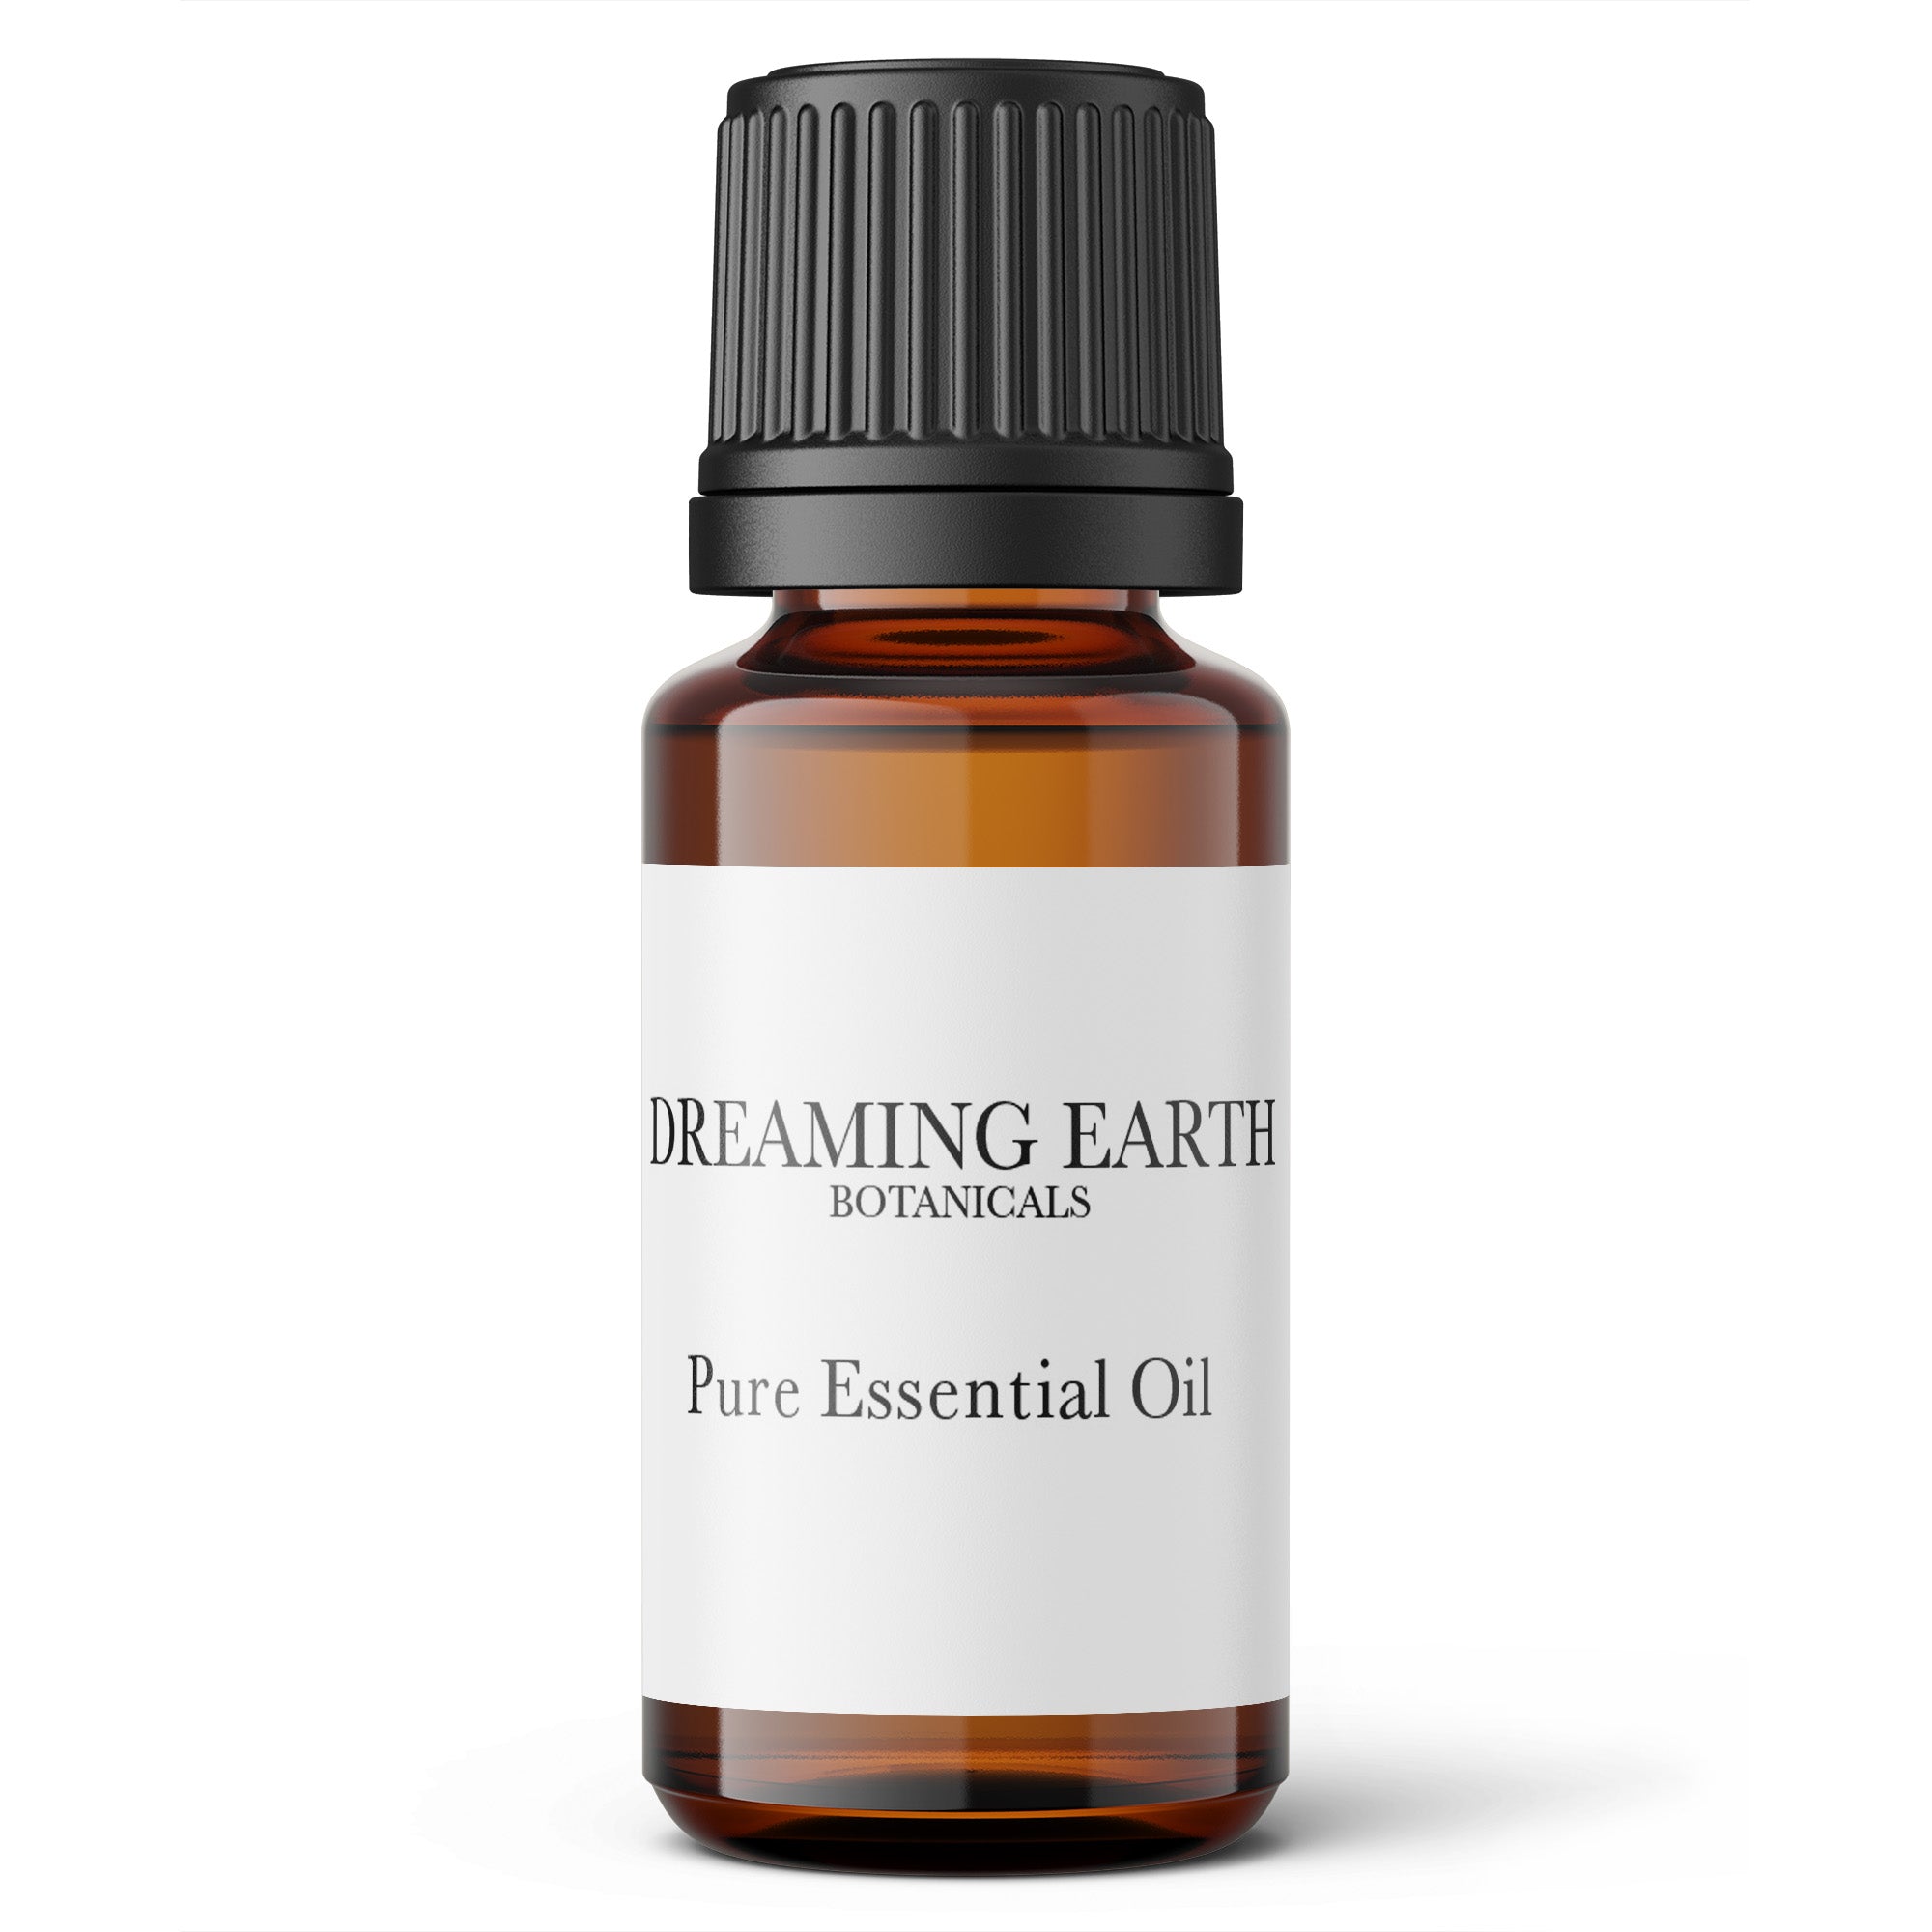 Load image into Gallery viewer, Tea Tree Essential Oil - Dreaming Earth Inc
